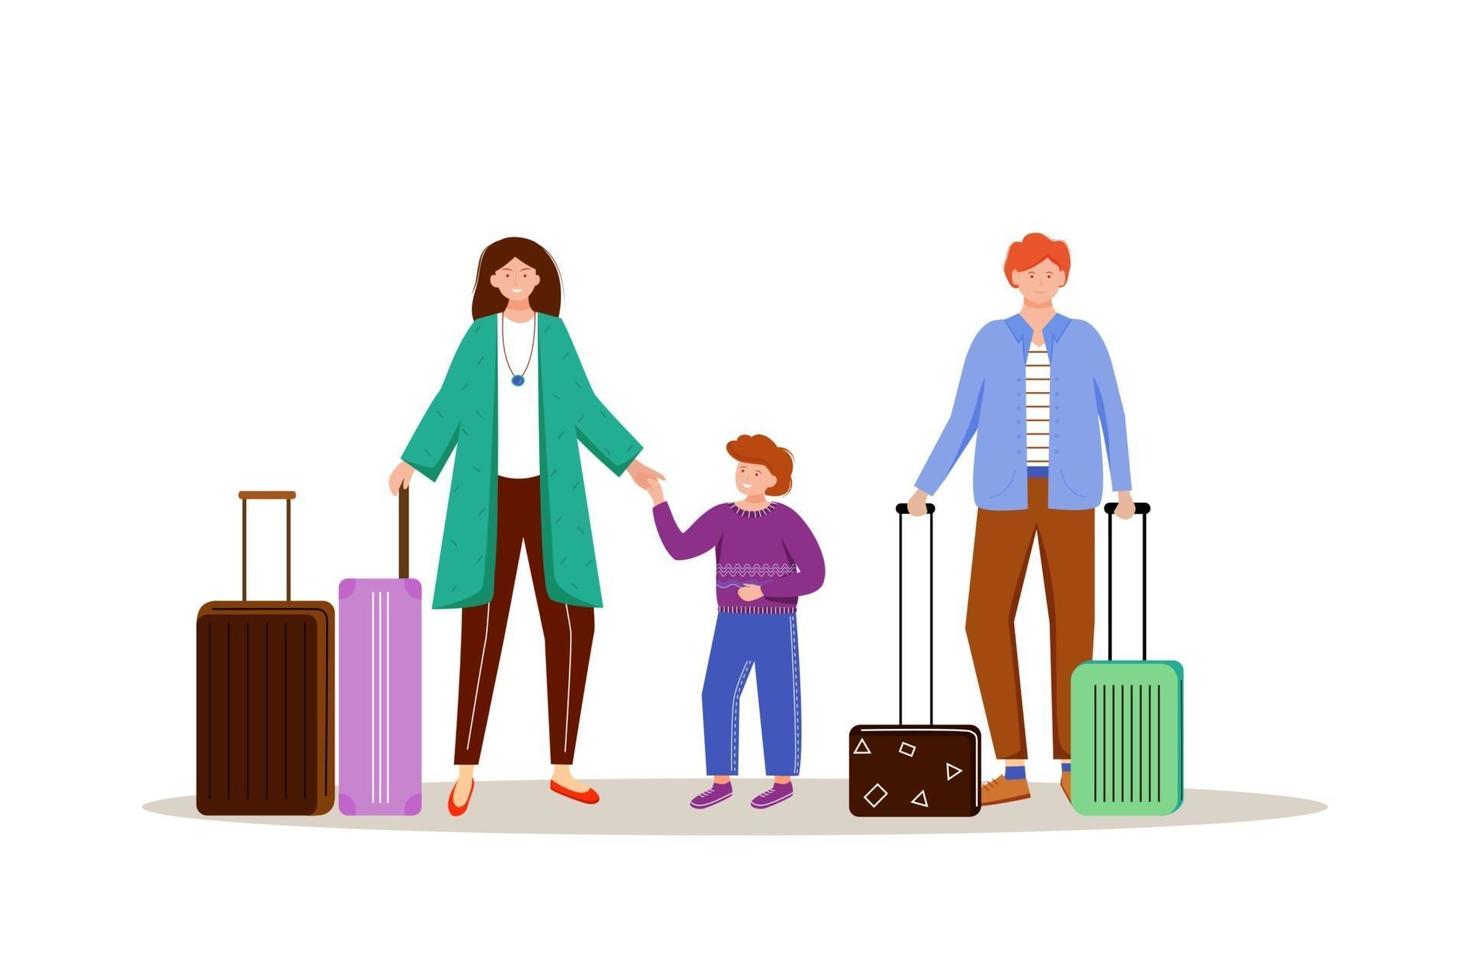 Family with luggage flat vector illustration. Getting ready for trip. Married couple with suitcases. Going on vacation. Voyage preparation isolated cartoon character on white background